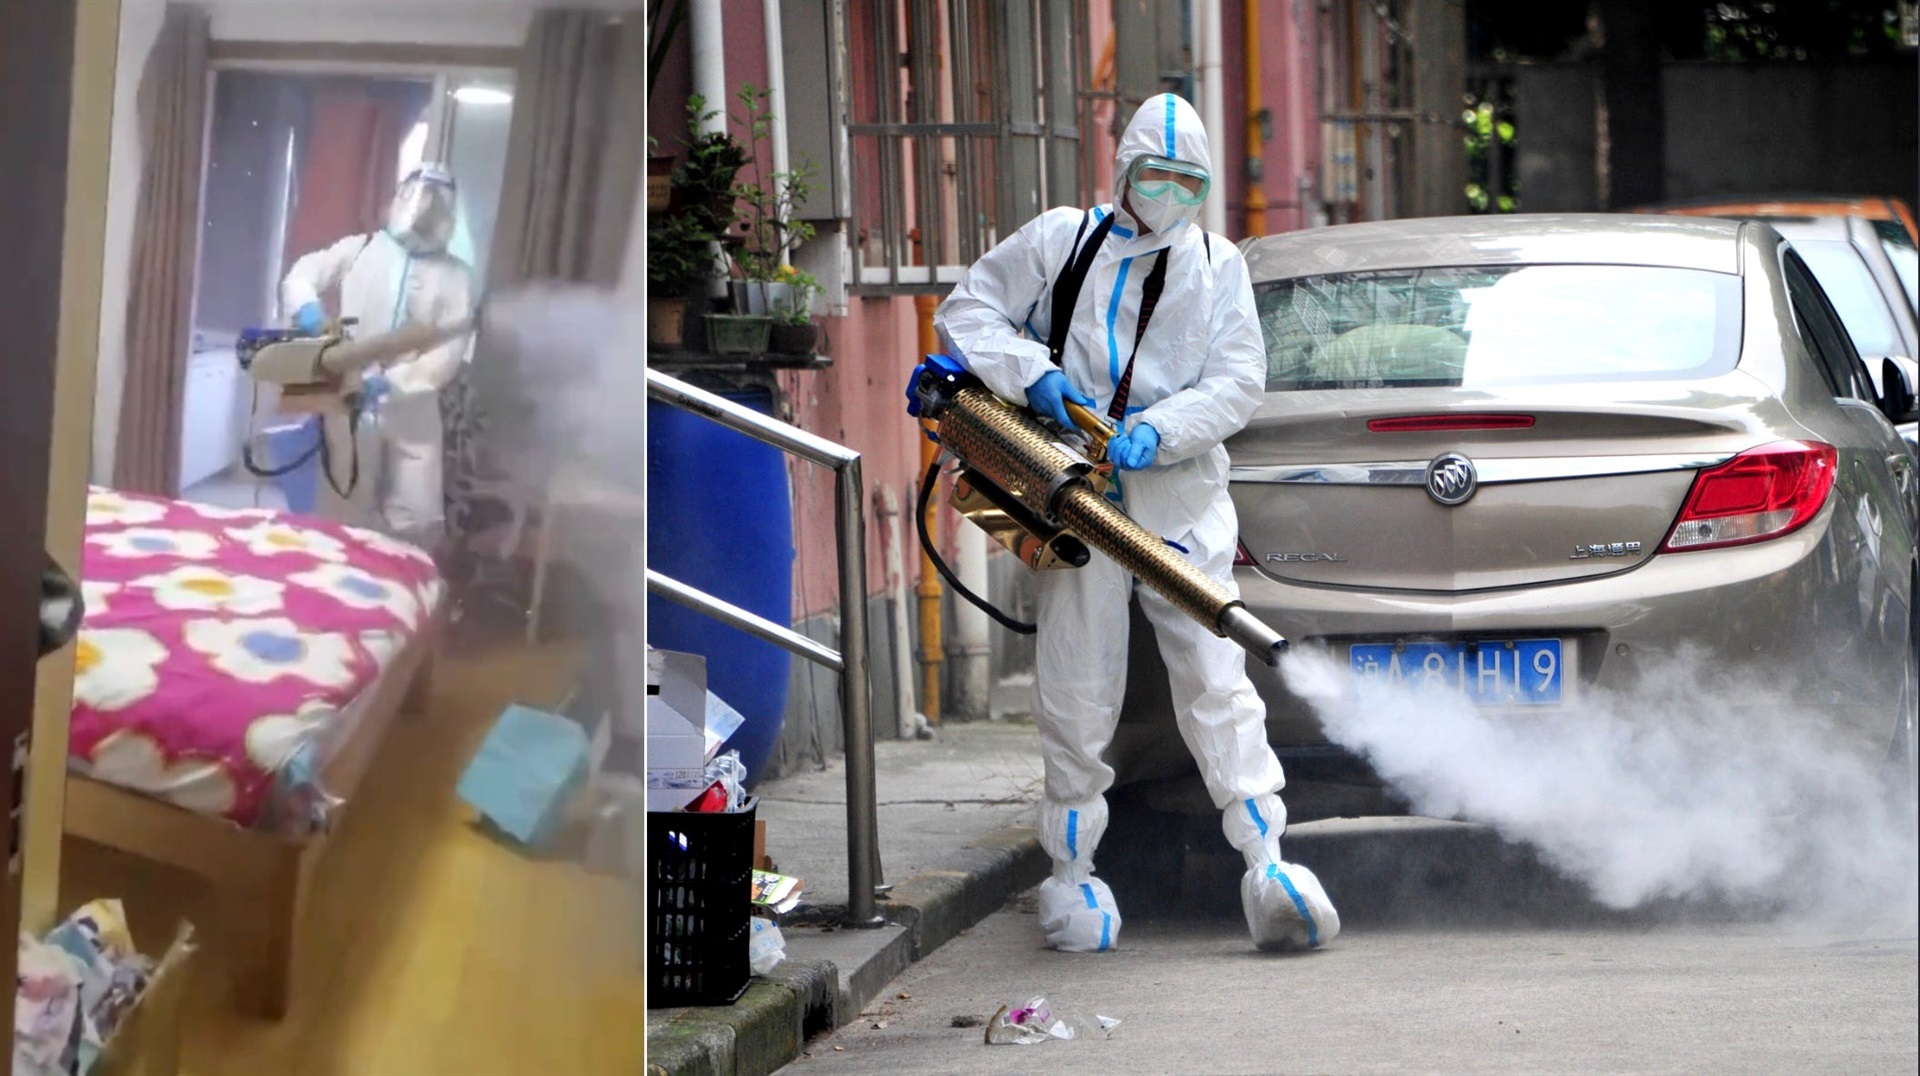 Chinese health officials have been spraying disinf